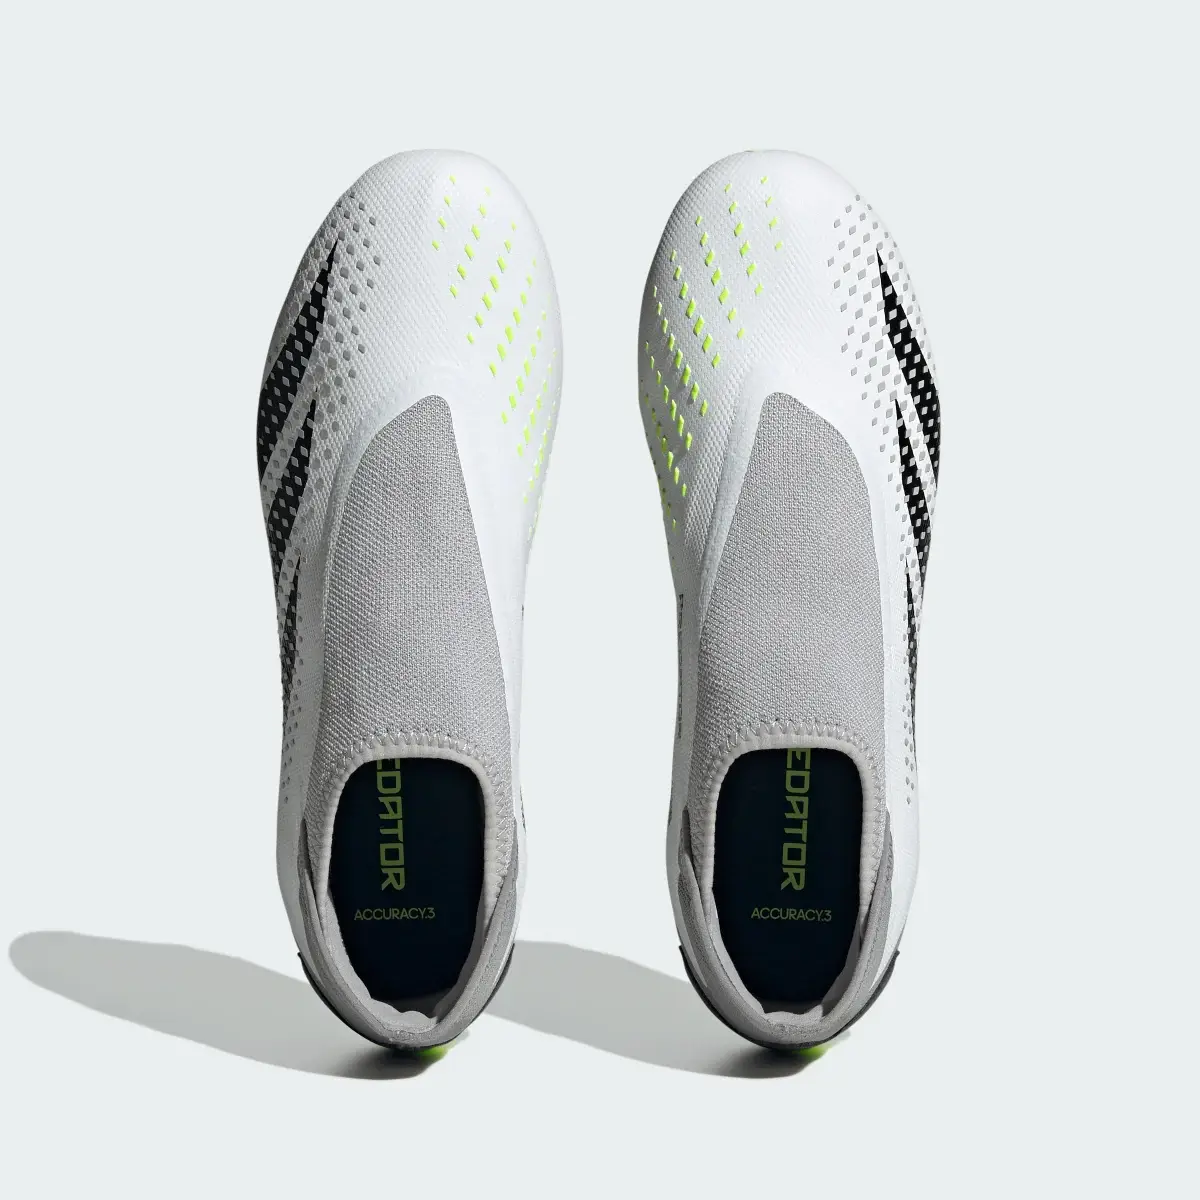 Adidas Predator Accuracy.3 Laceless Firm Ground Boots. 3